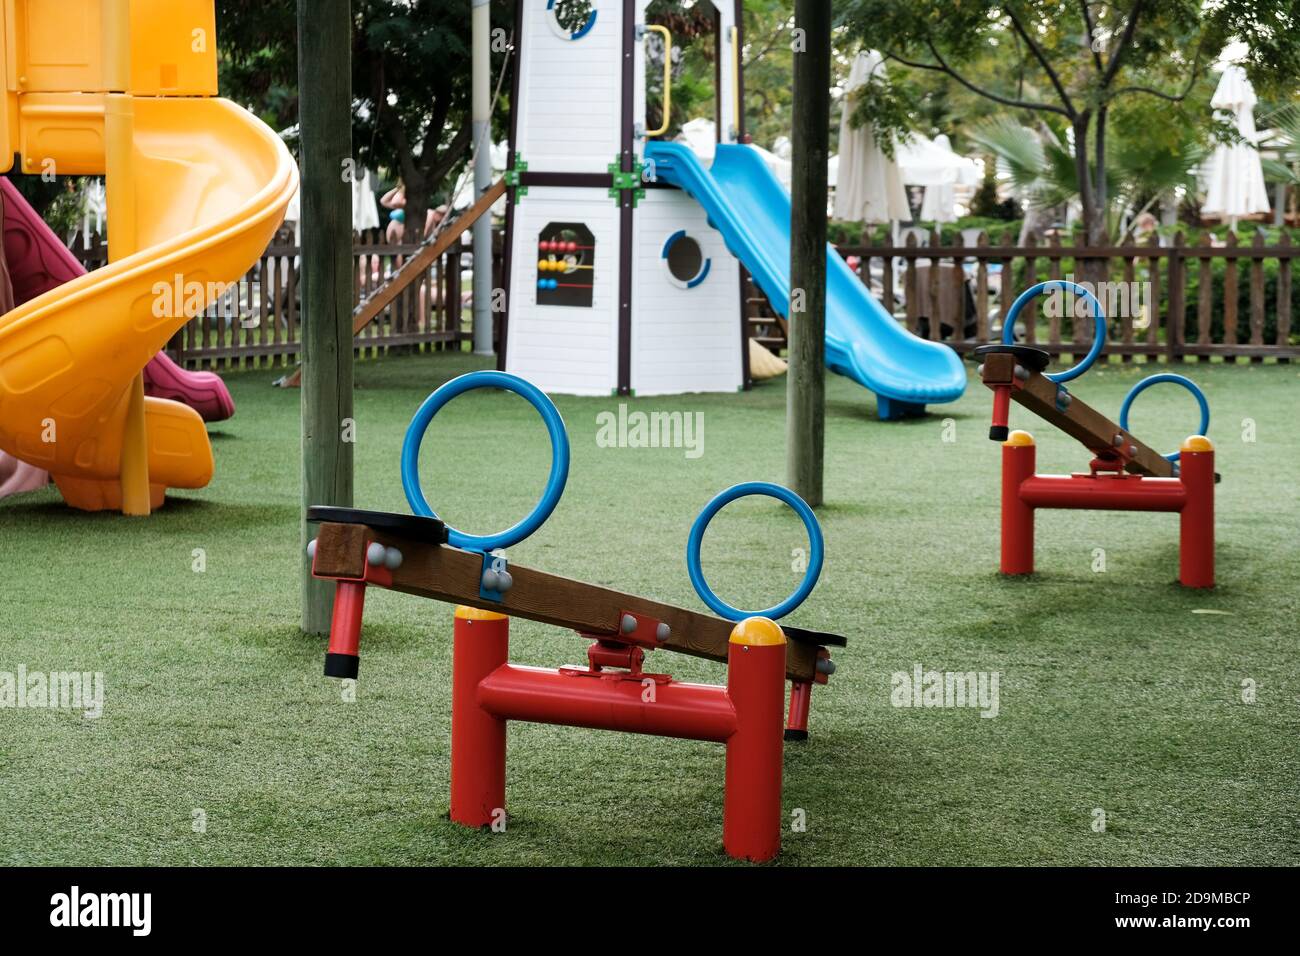 Empty swings on kindergarten playground. Unattended slide and swing set during coronavirus outbreak. Closed for children in pandemic. Nobody playing Stock Photo